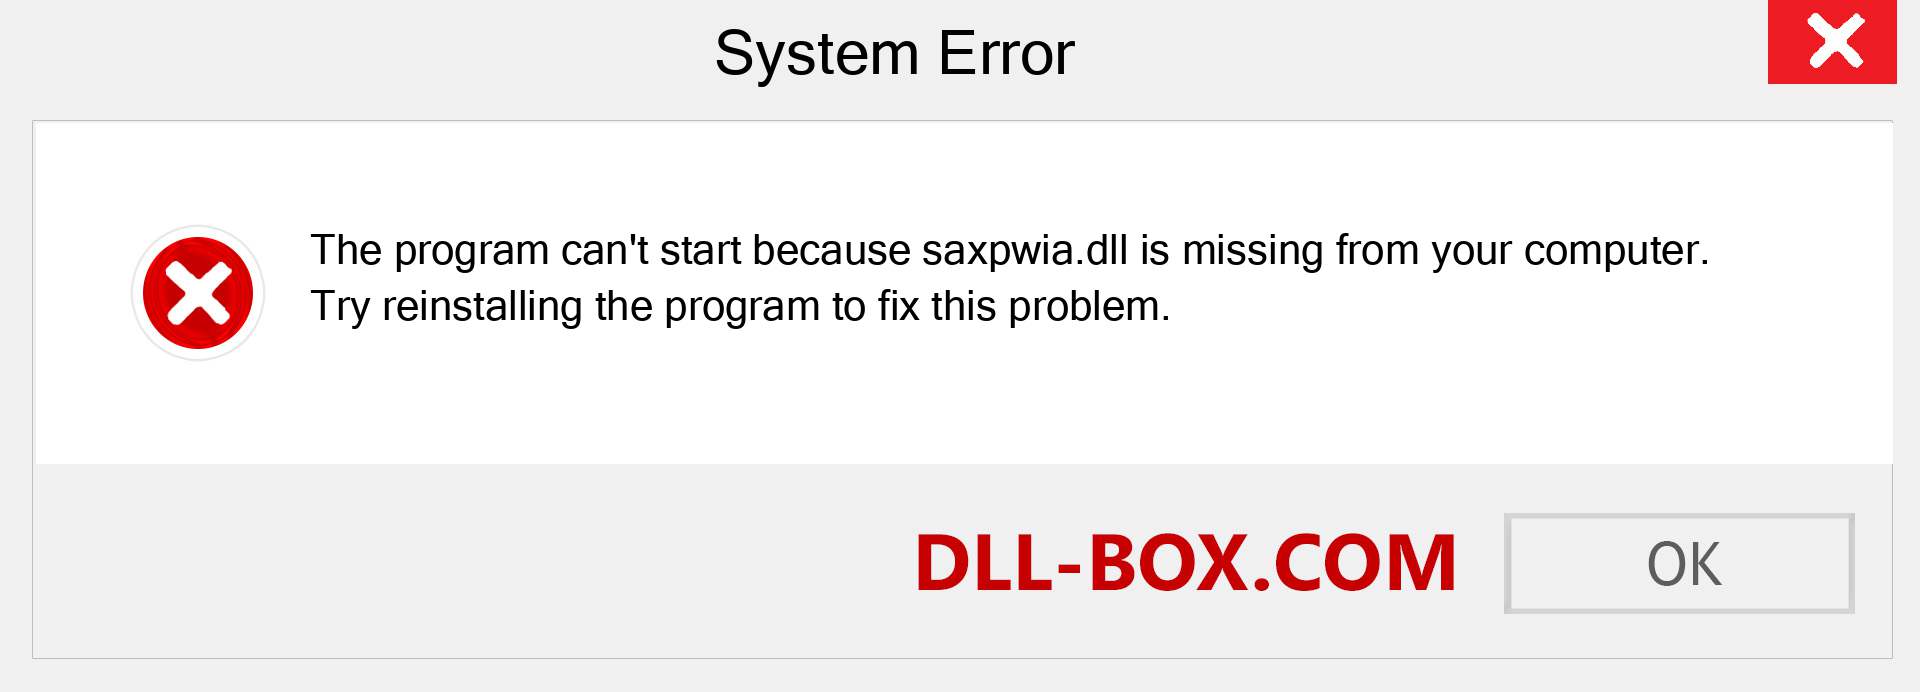  saxpwia.dll file is missing?. Download for Windows 7, 8, 10 - Fix  saxpwia dll Missing Error on Windows, photos, images